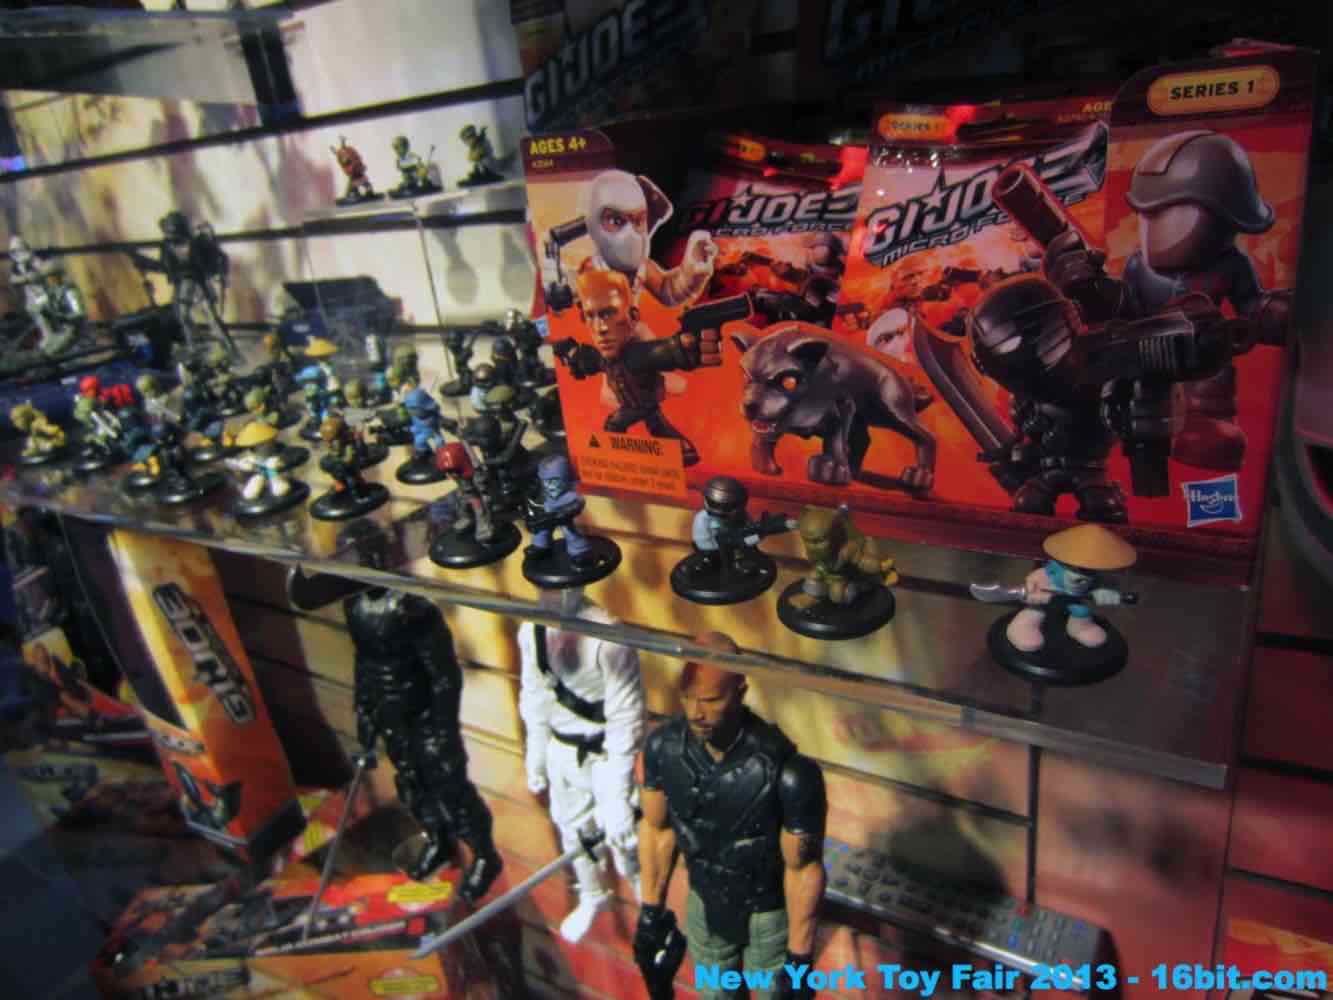 16bit.com: Toy Fair Coverage of G.I. Joe Action Figures and Toys from Adam Pawlus1467 x 1100